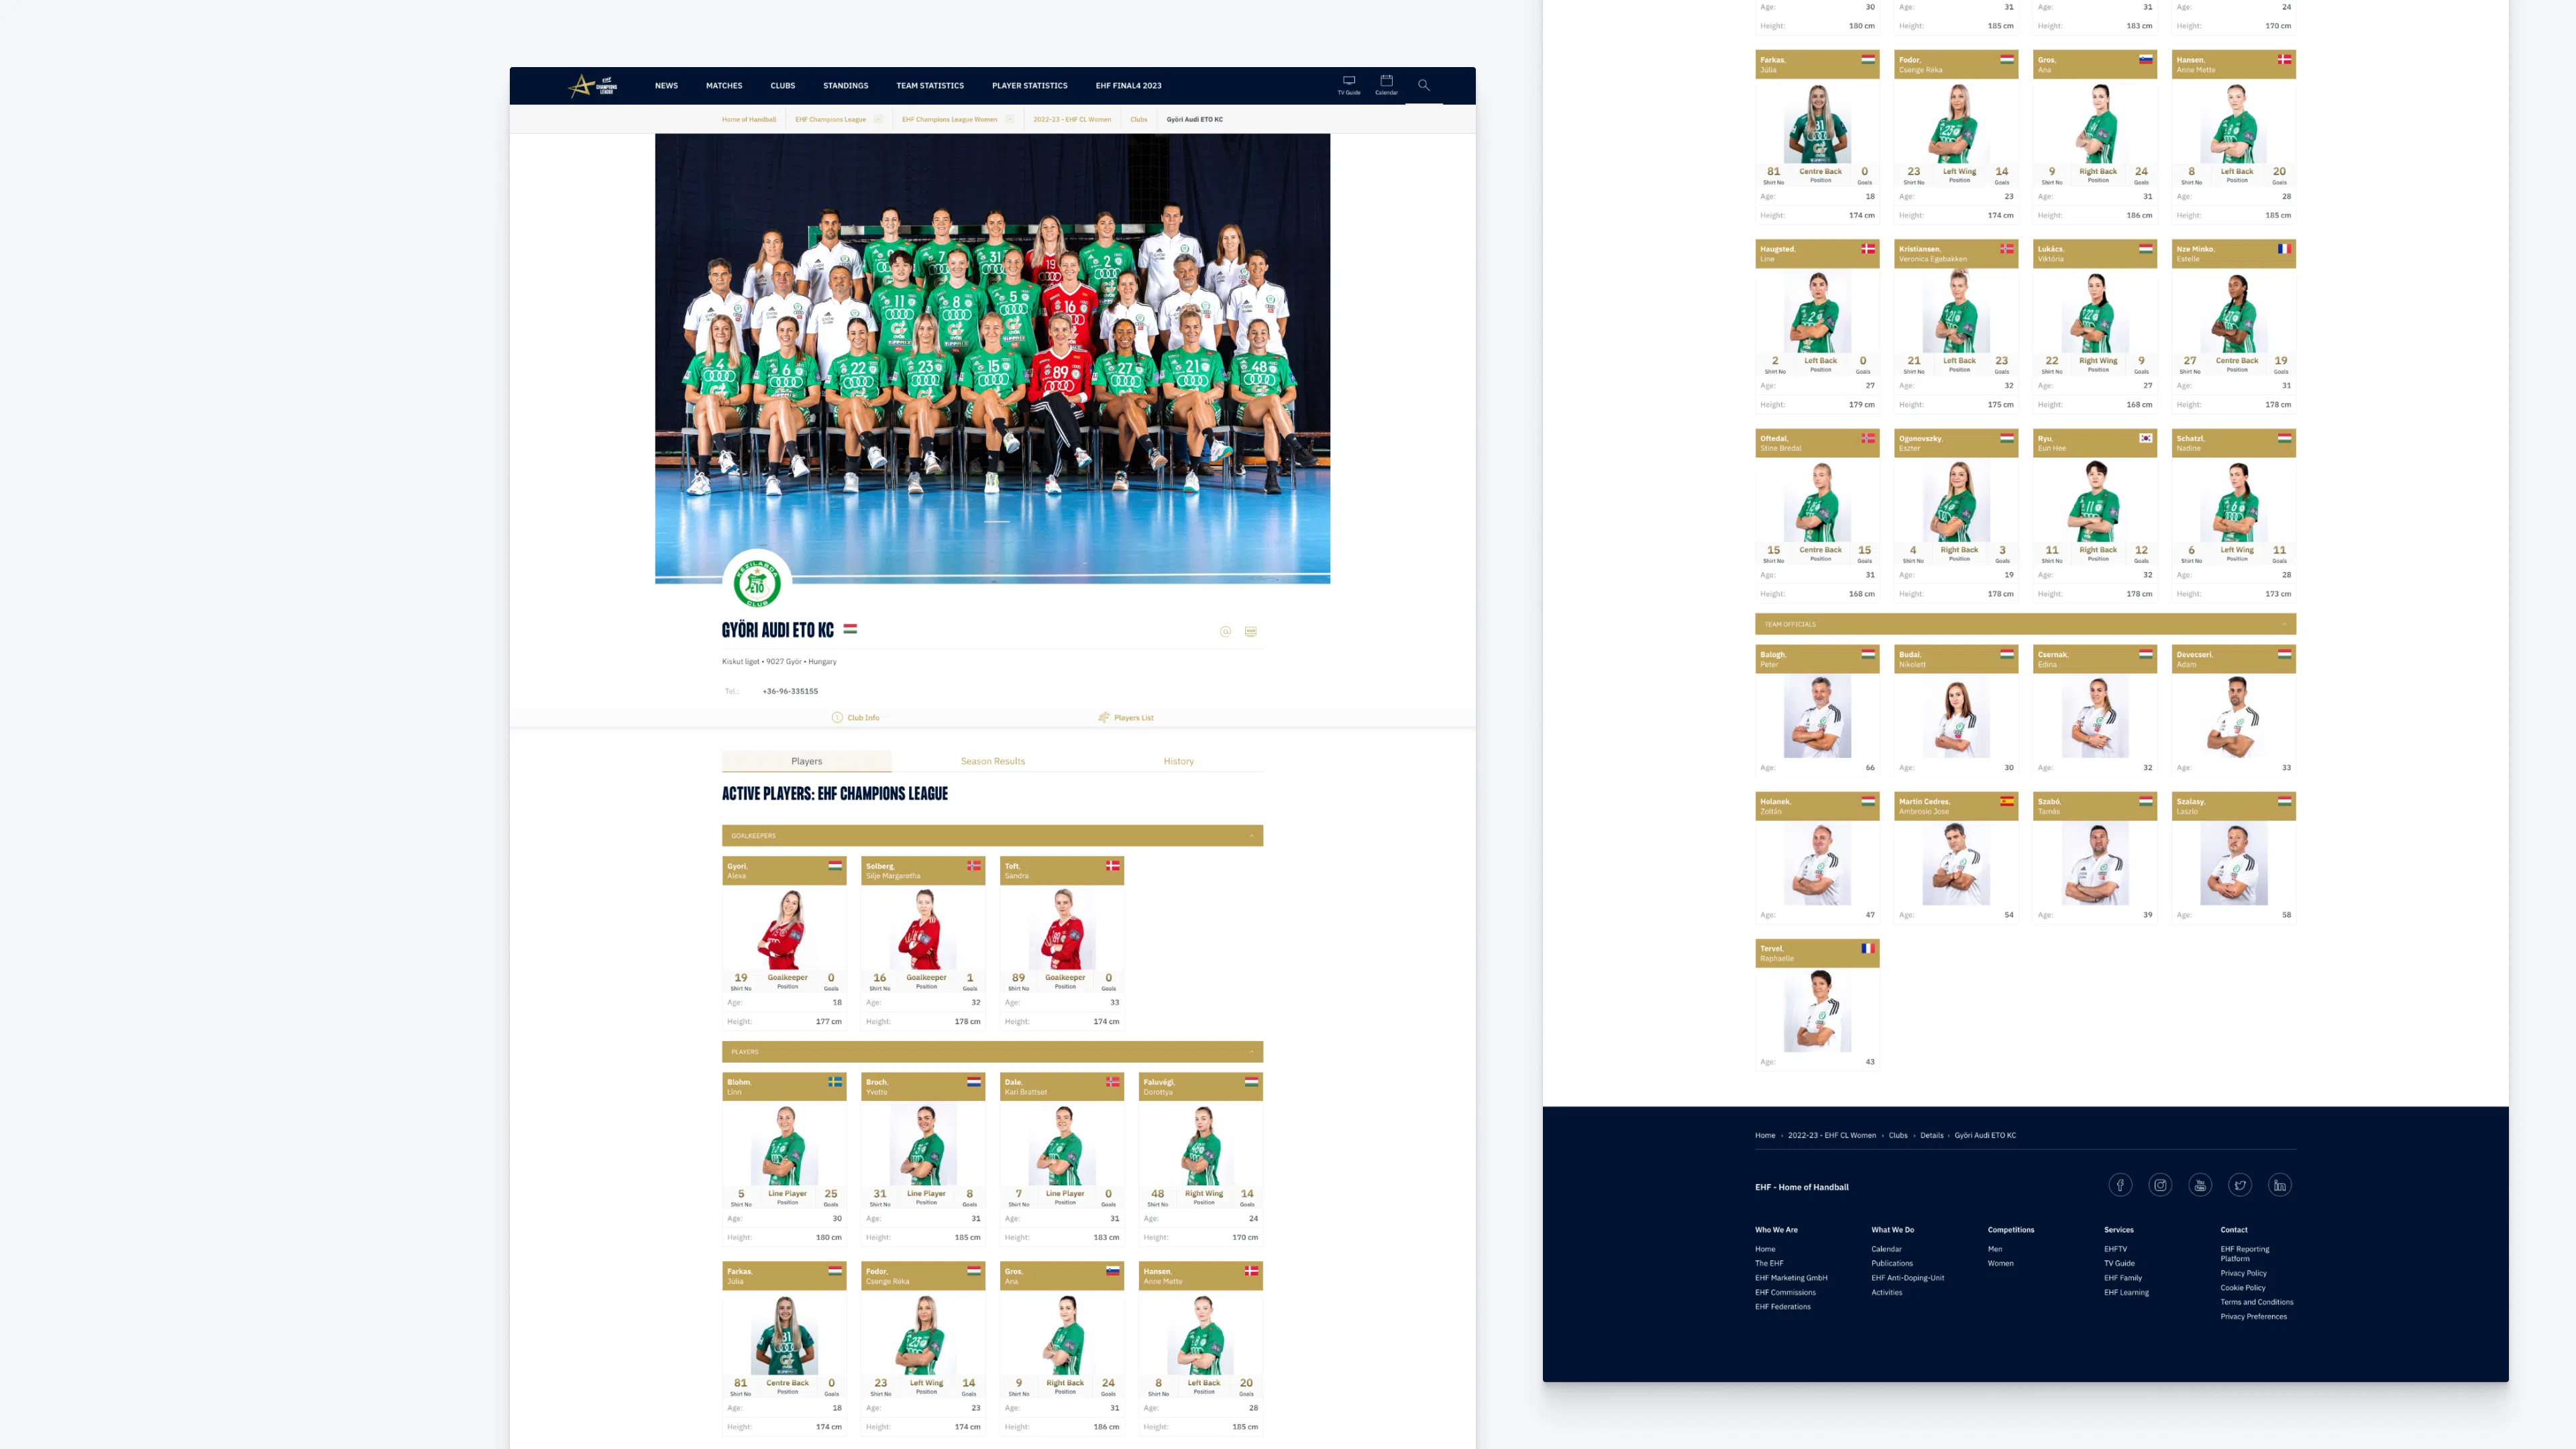 EHF – European Handball Federation Team Overview Page including Player Details